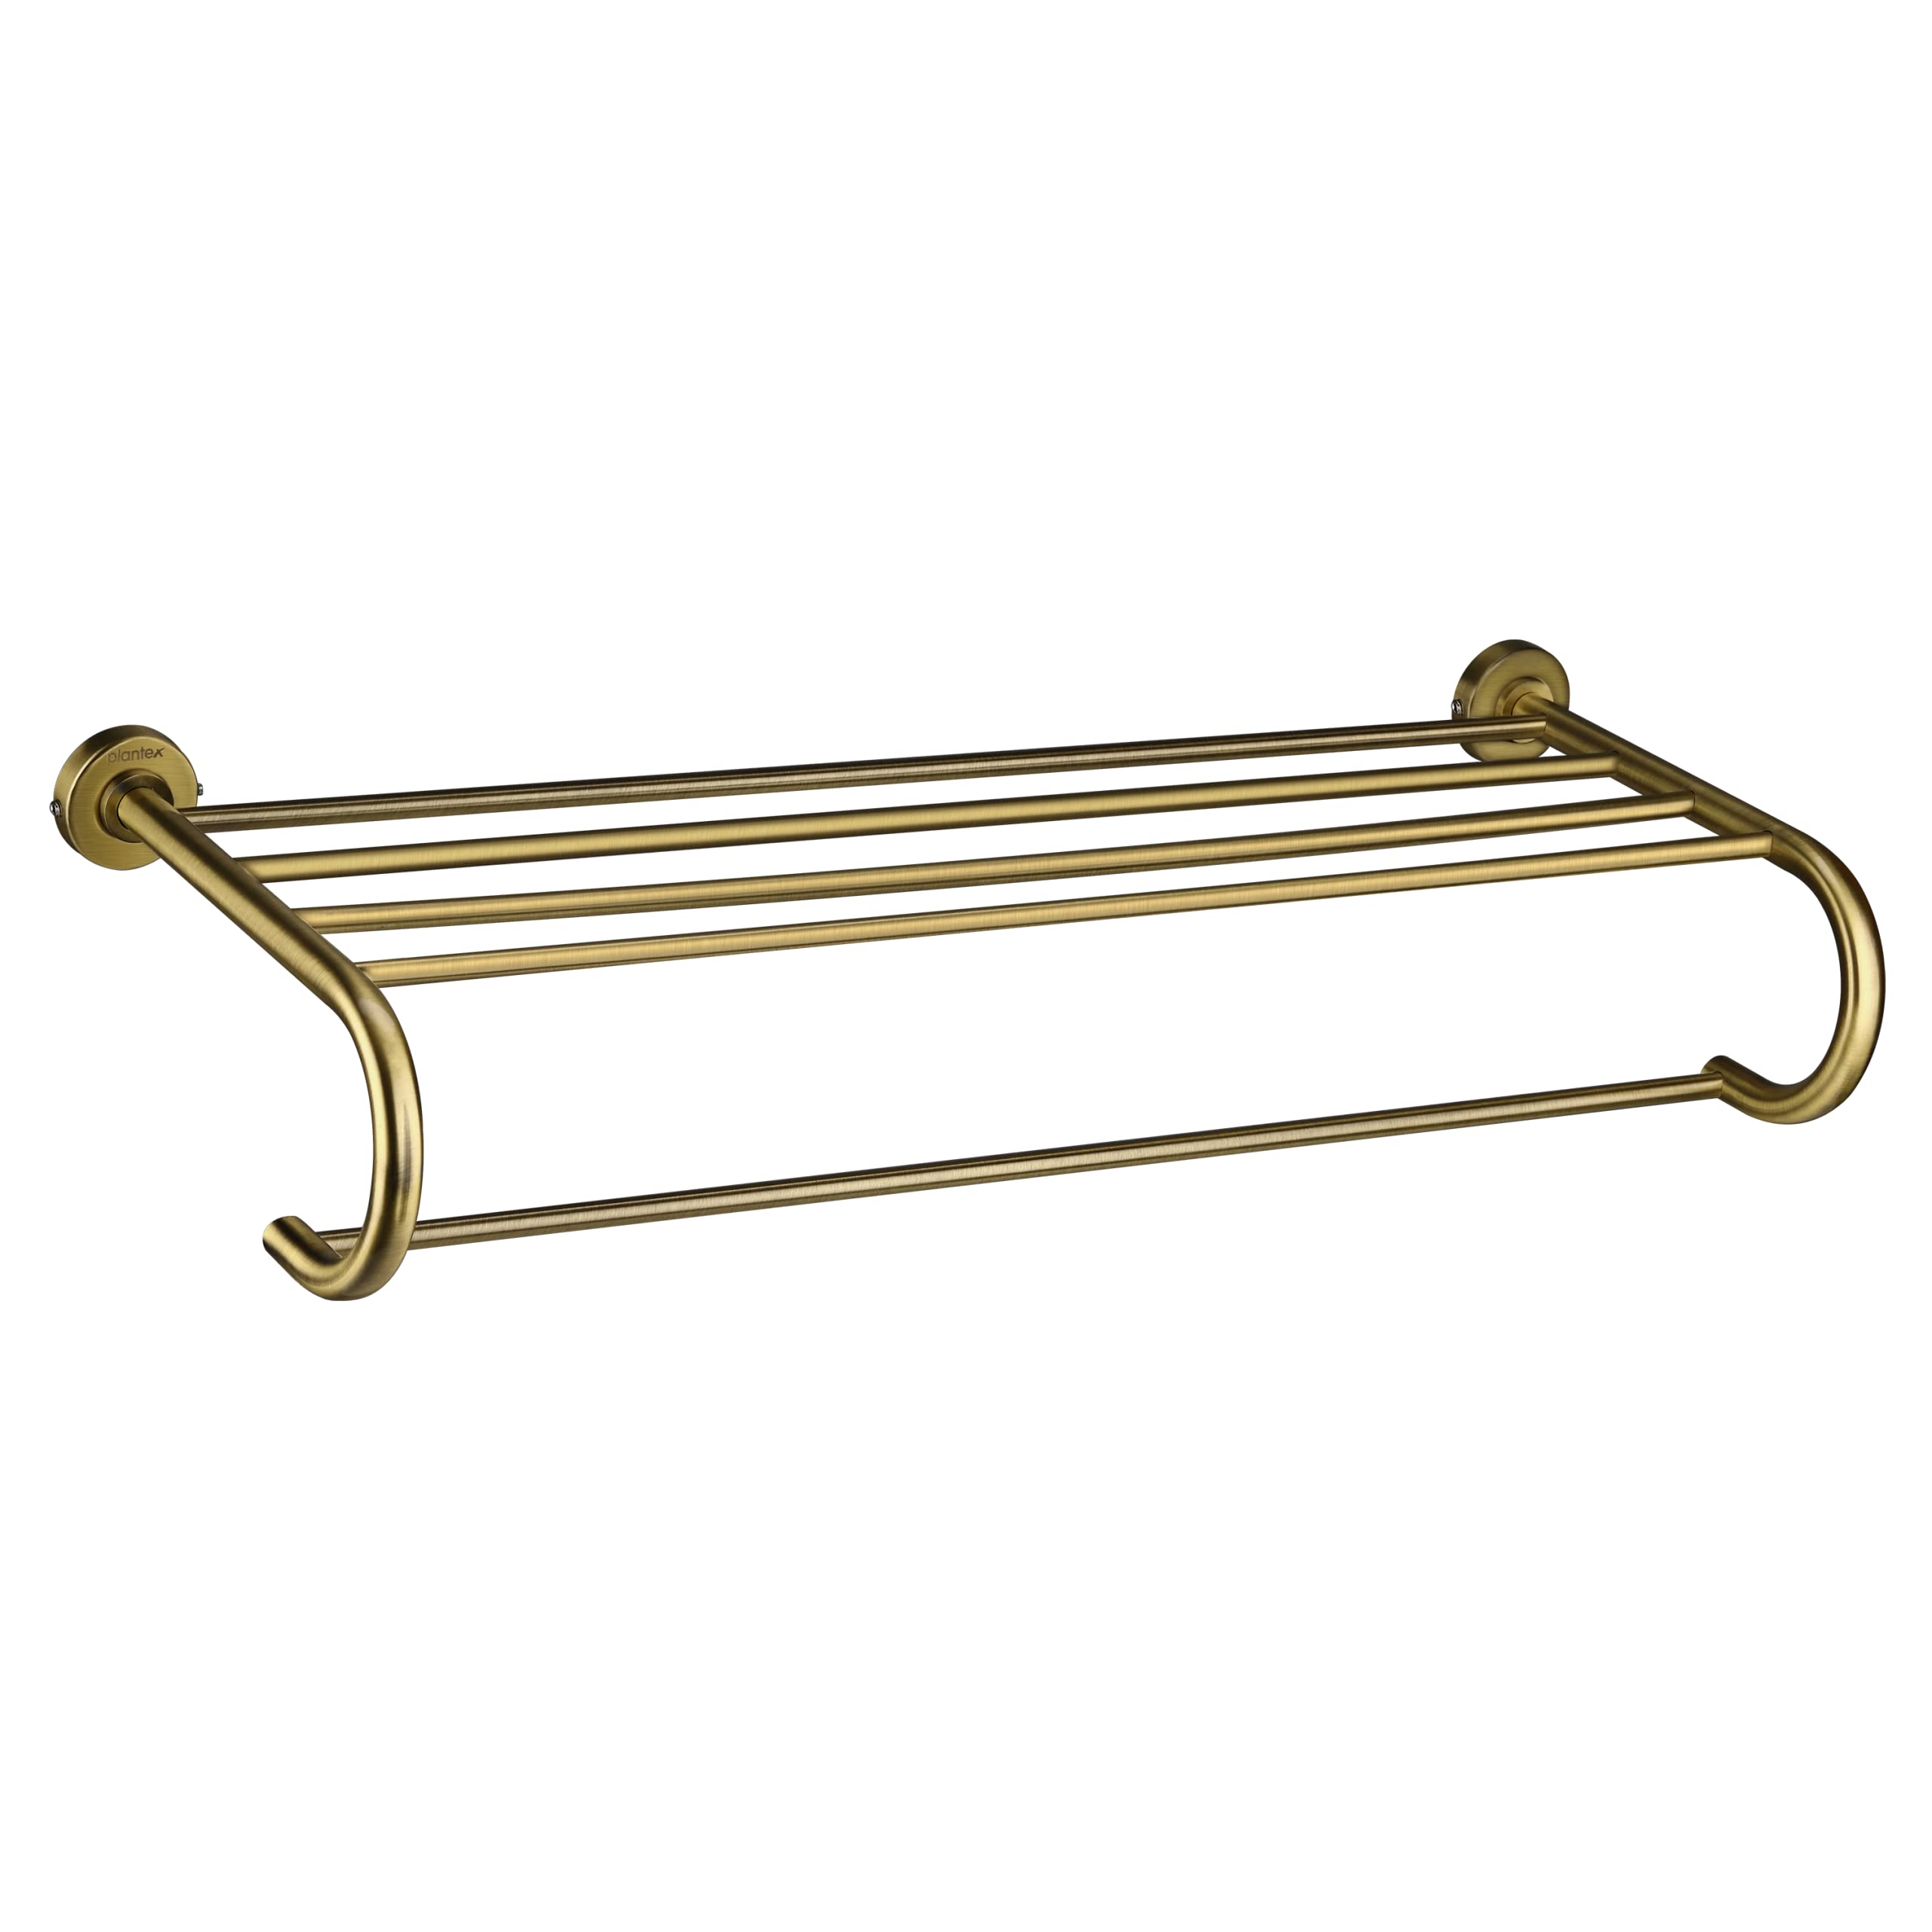 Plantex Daizy Antique 24-inches Long Towel Hanger for Bathroom - 304 Stainless Steel